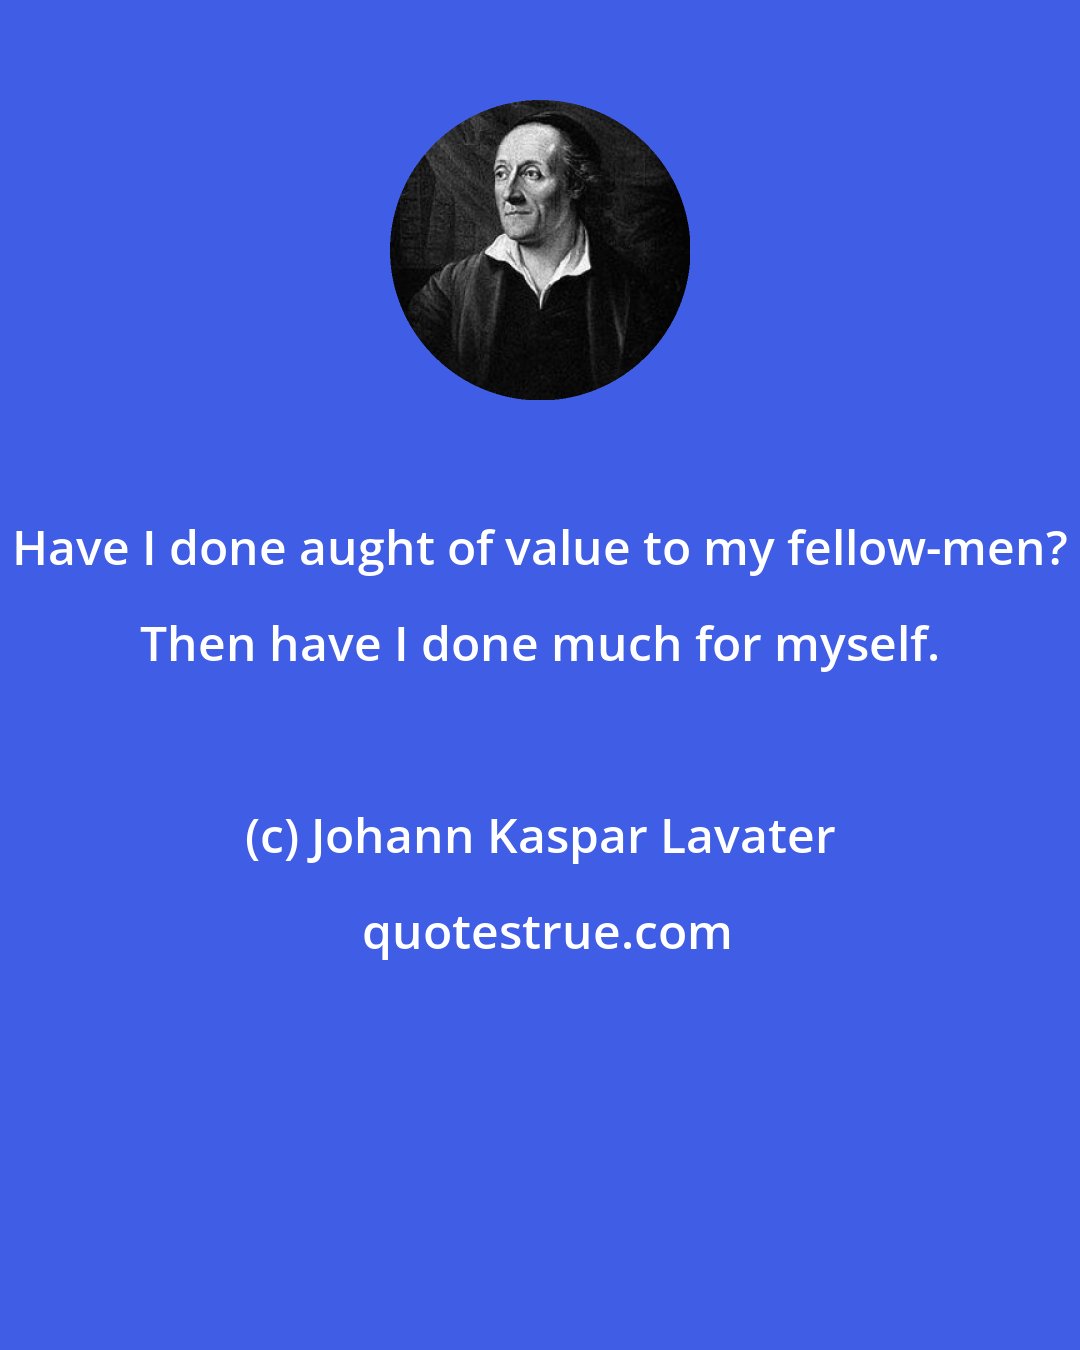 Johann Kaspar Lavater: Have I done aught of value to my fellow-men? Then have I done much for myself.